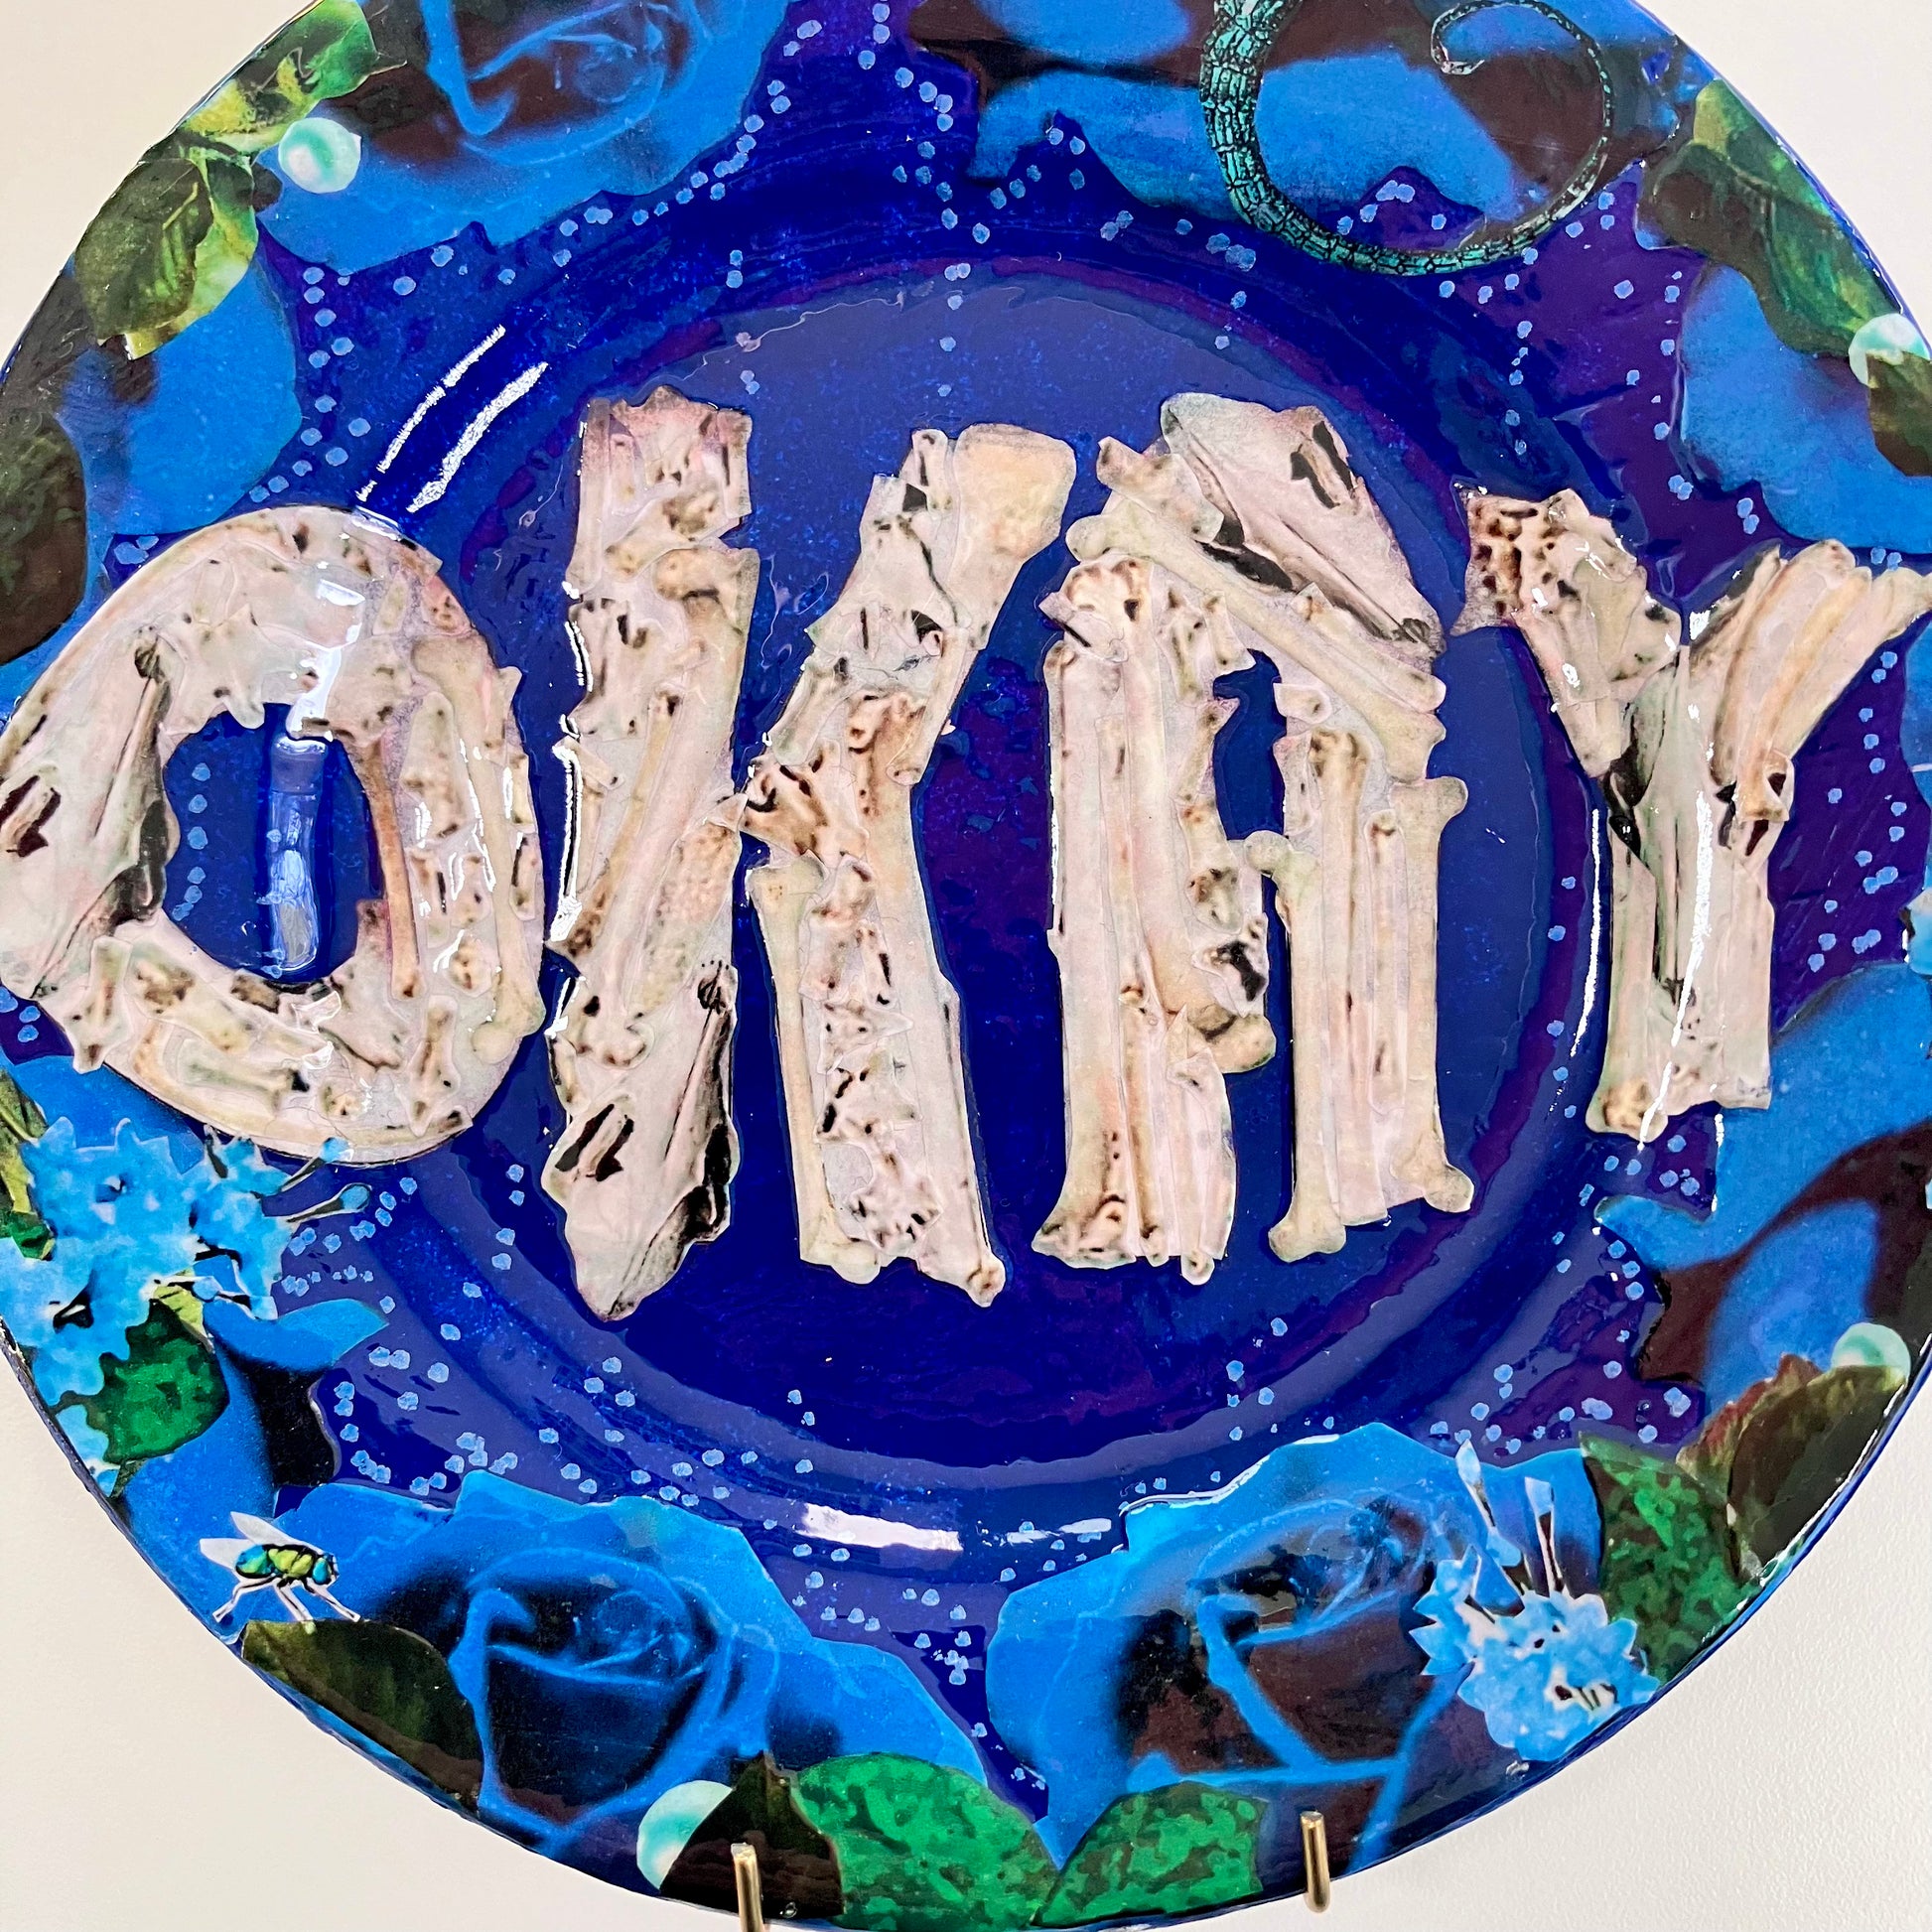 House of Frisson's "Okay" Wall Plate one-of-a-kind collage artwork on up-cycled plate. Closeup detail of the collage showing the word "Okay" written with bones, framed by blue roses, on a blue background.